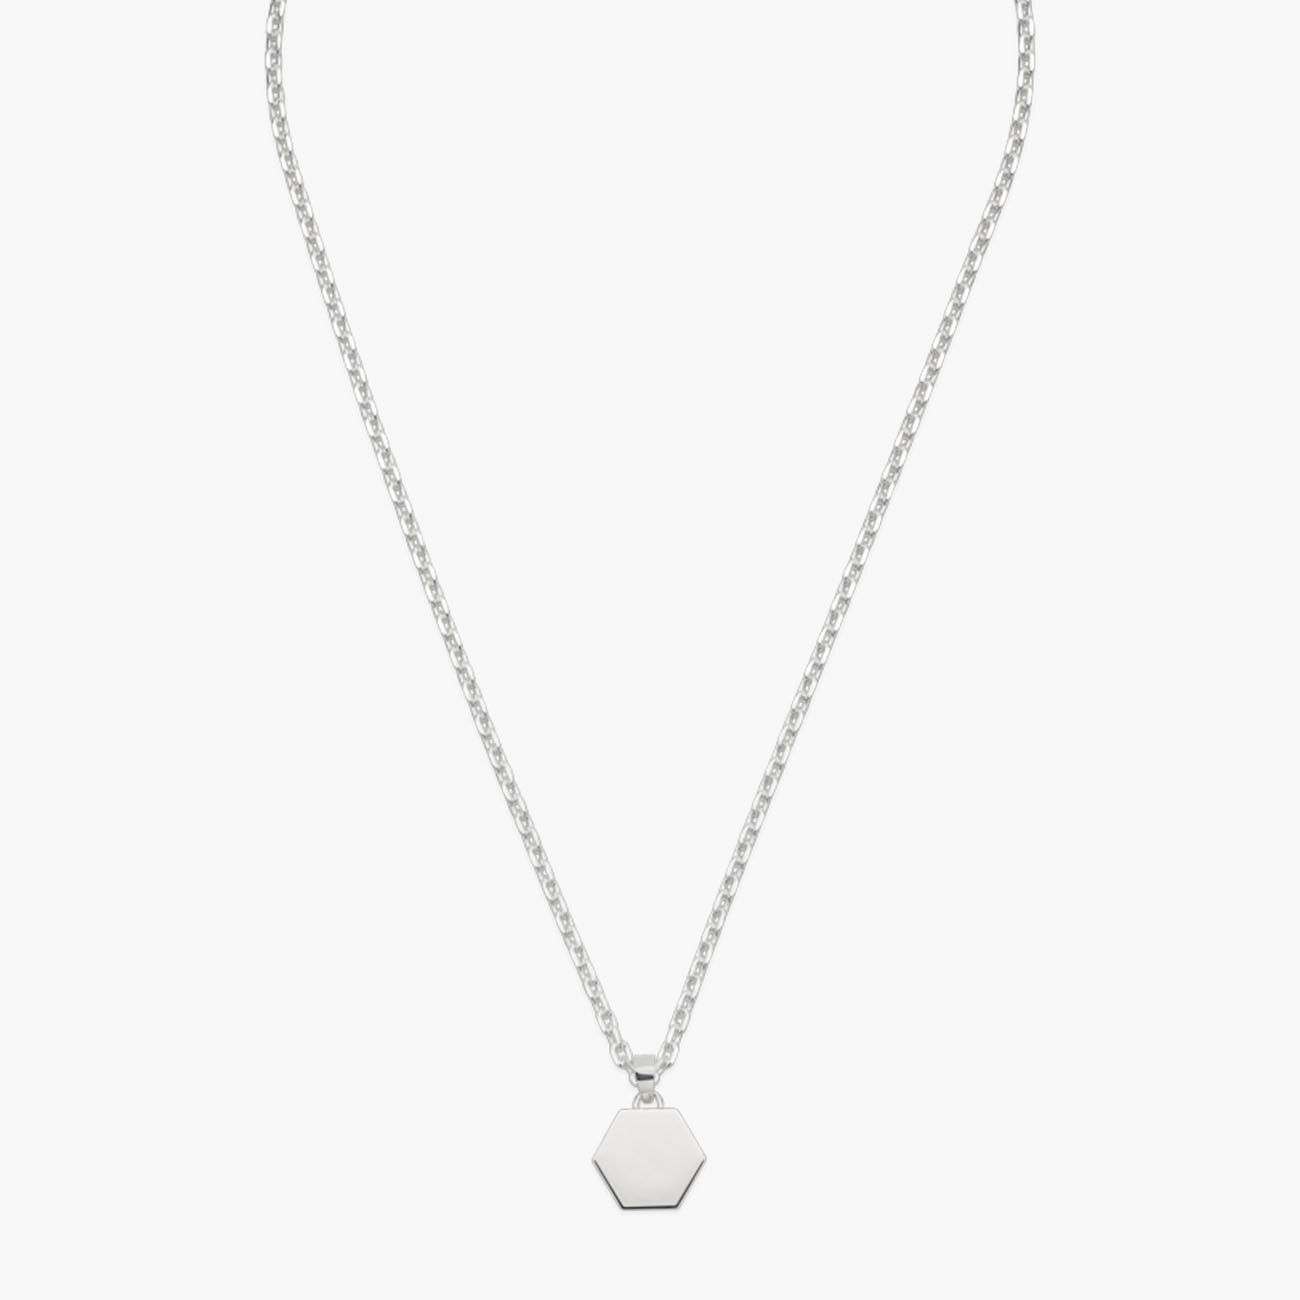 Gucci Trademark Necklace Back